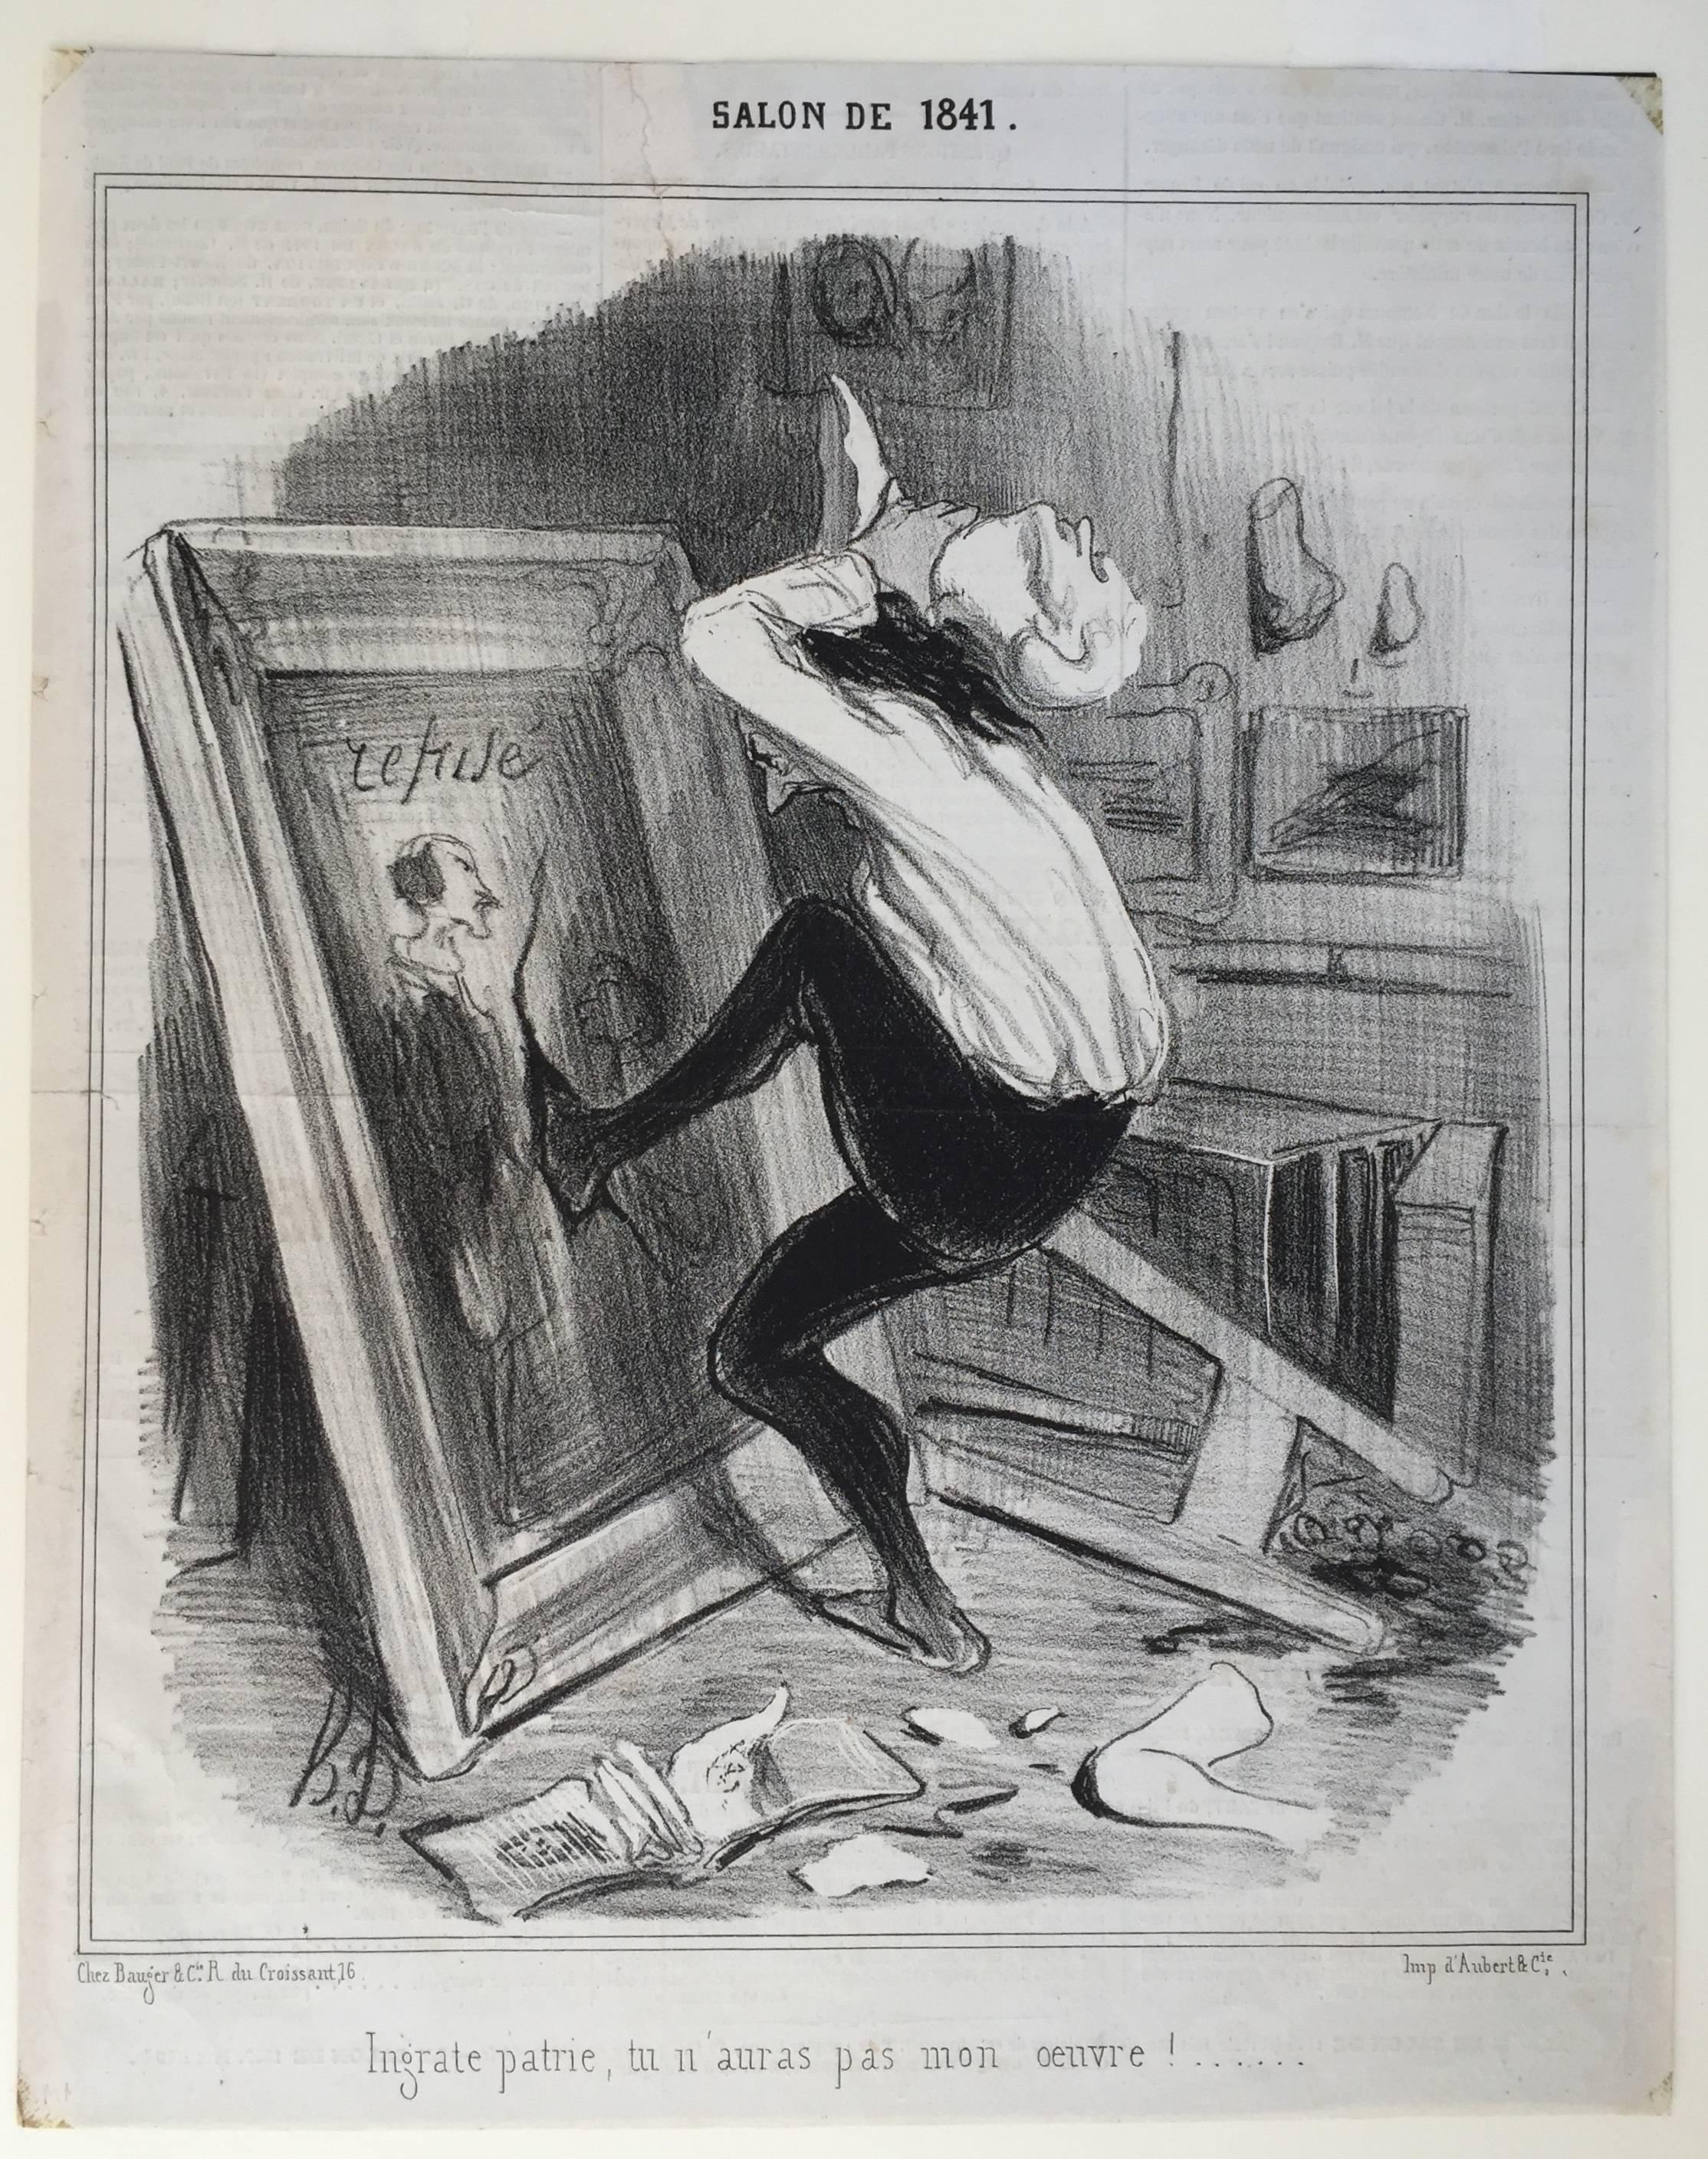 REFUSED BY THE SALON - Print by Honoré Daumier